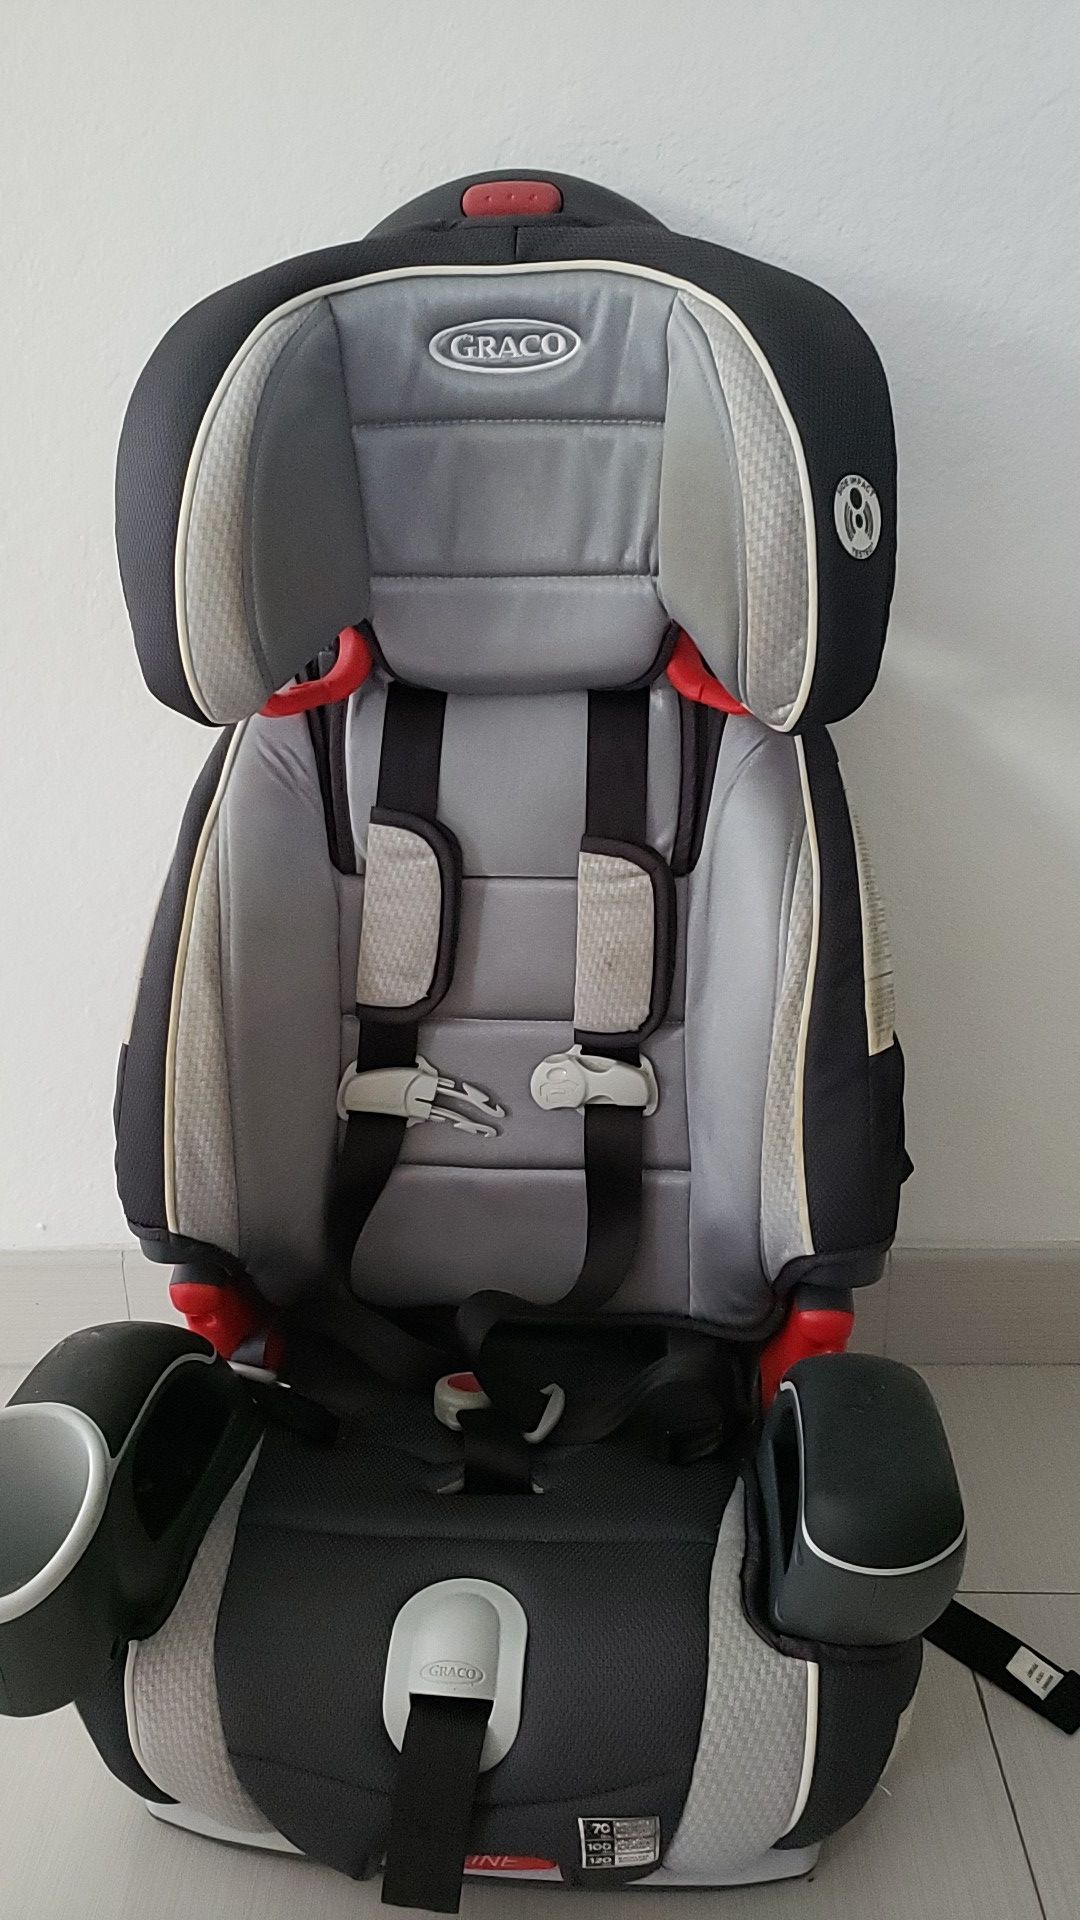 Graco 3 in 1 car seat and booster